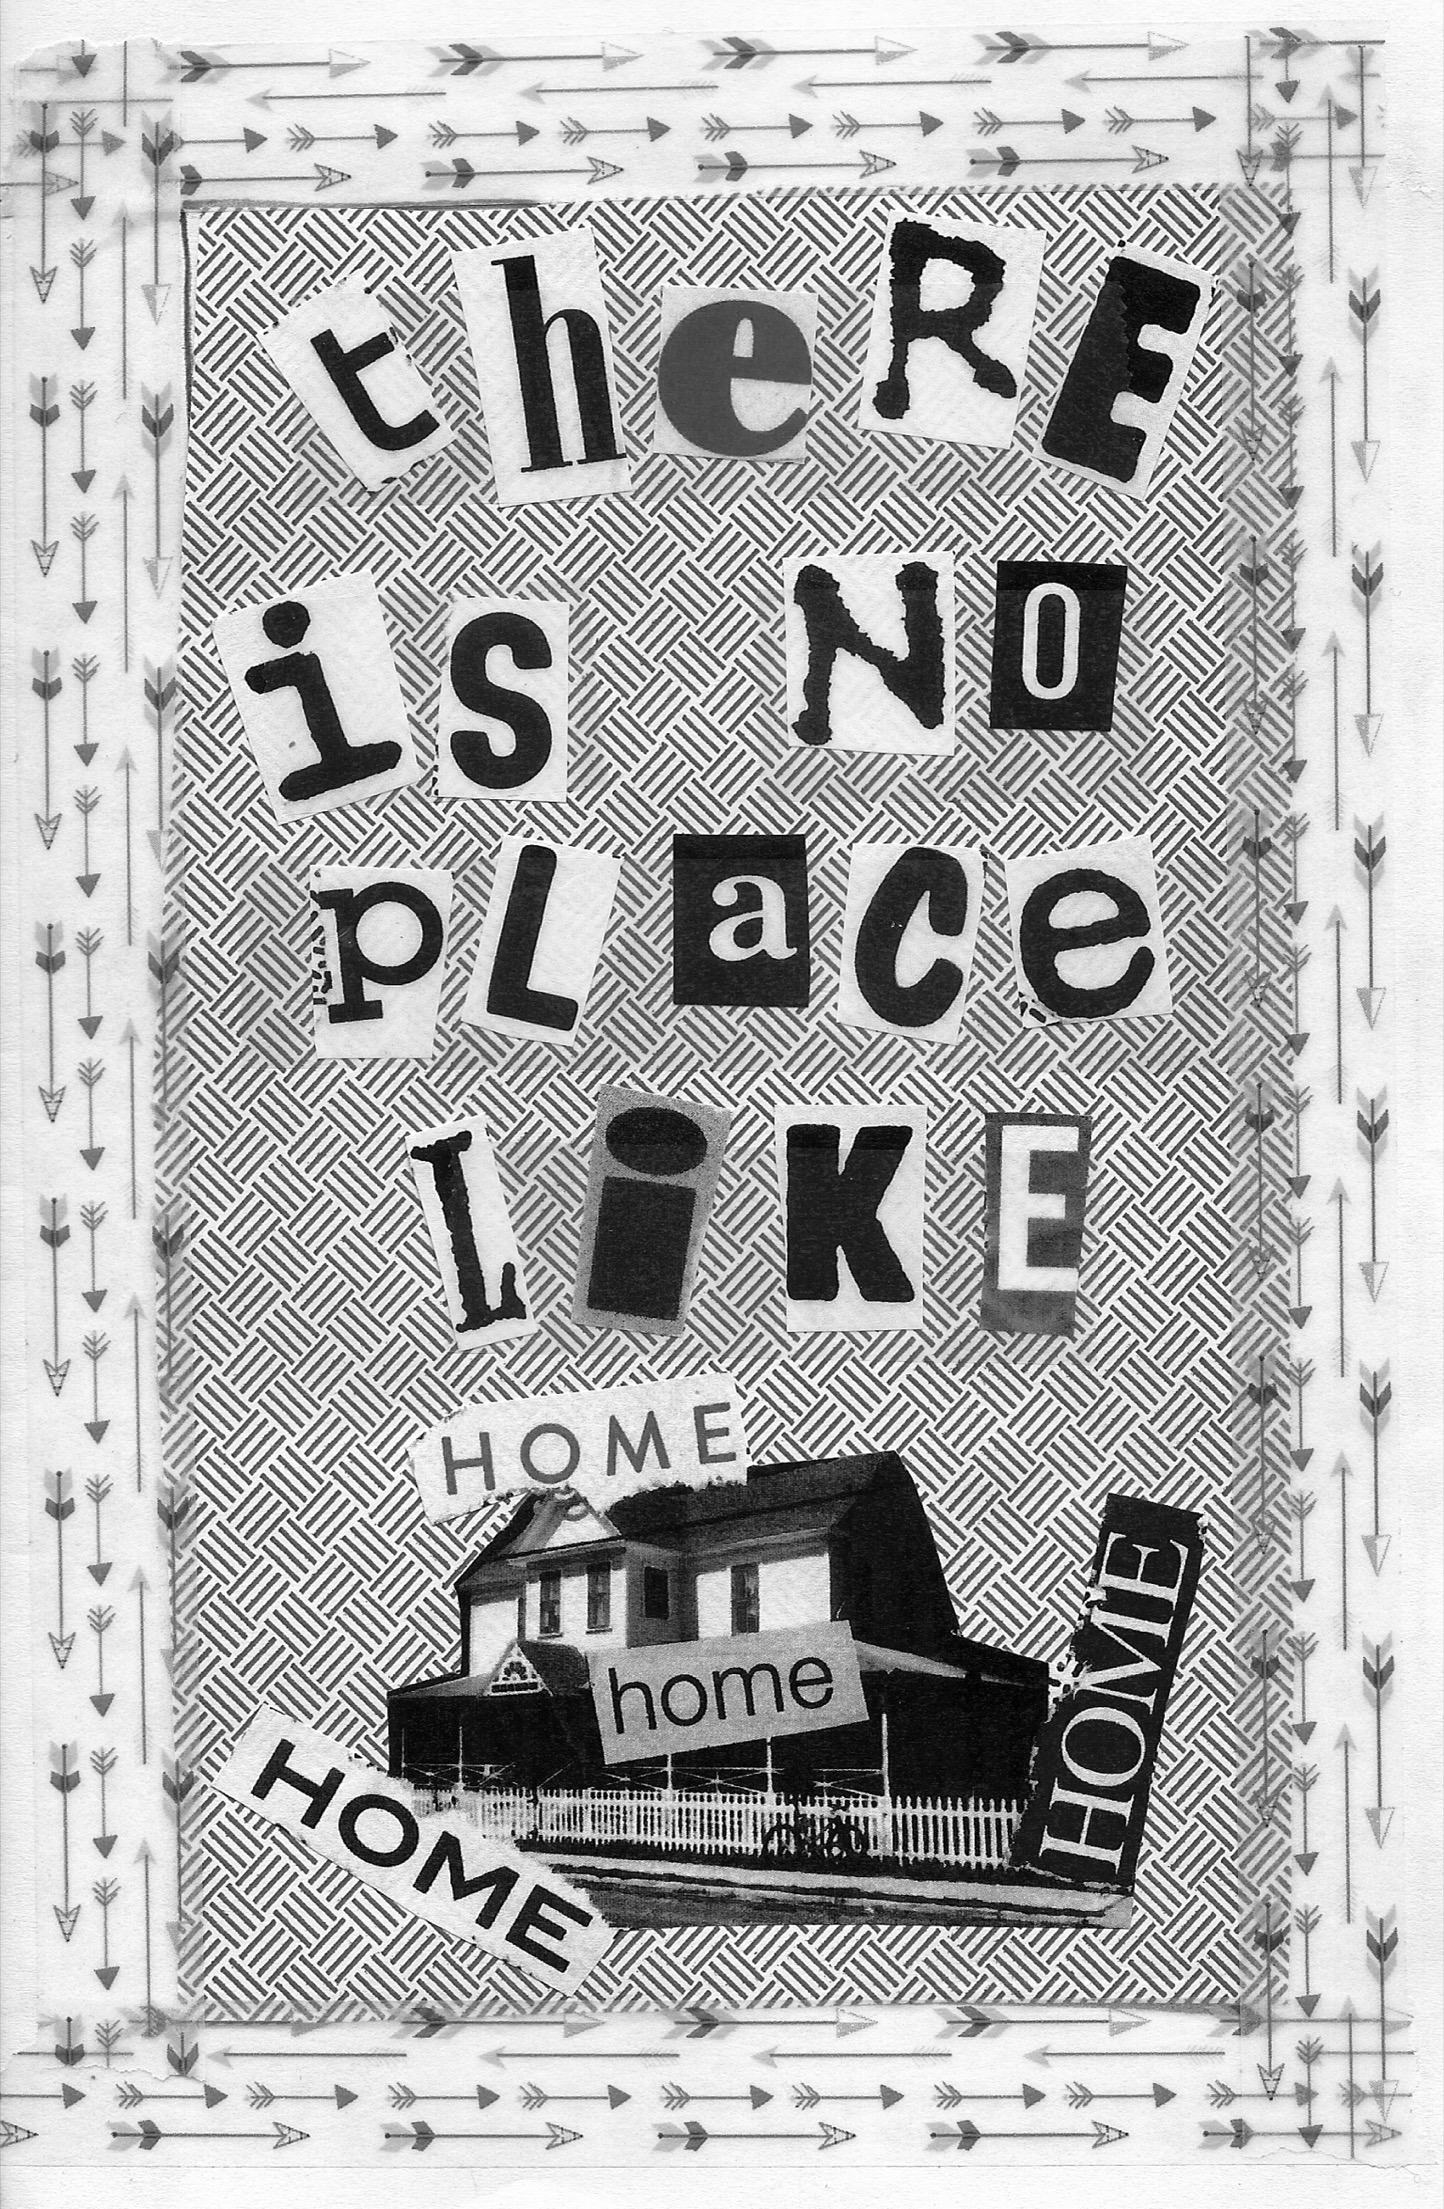 Zine 1: “There Is No Place Like Home” 